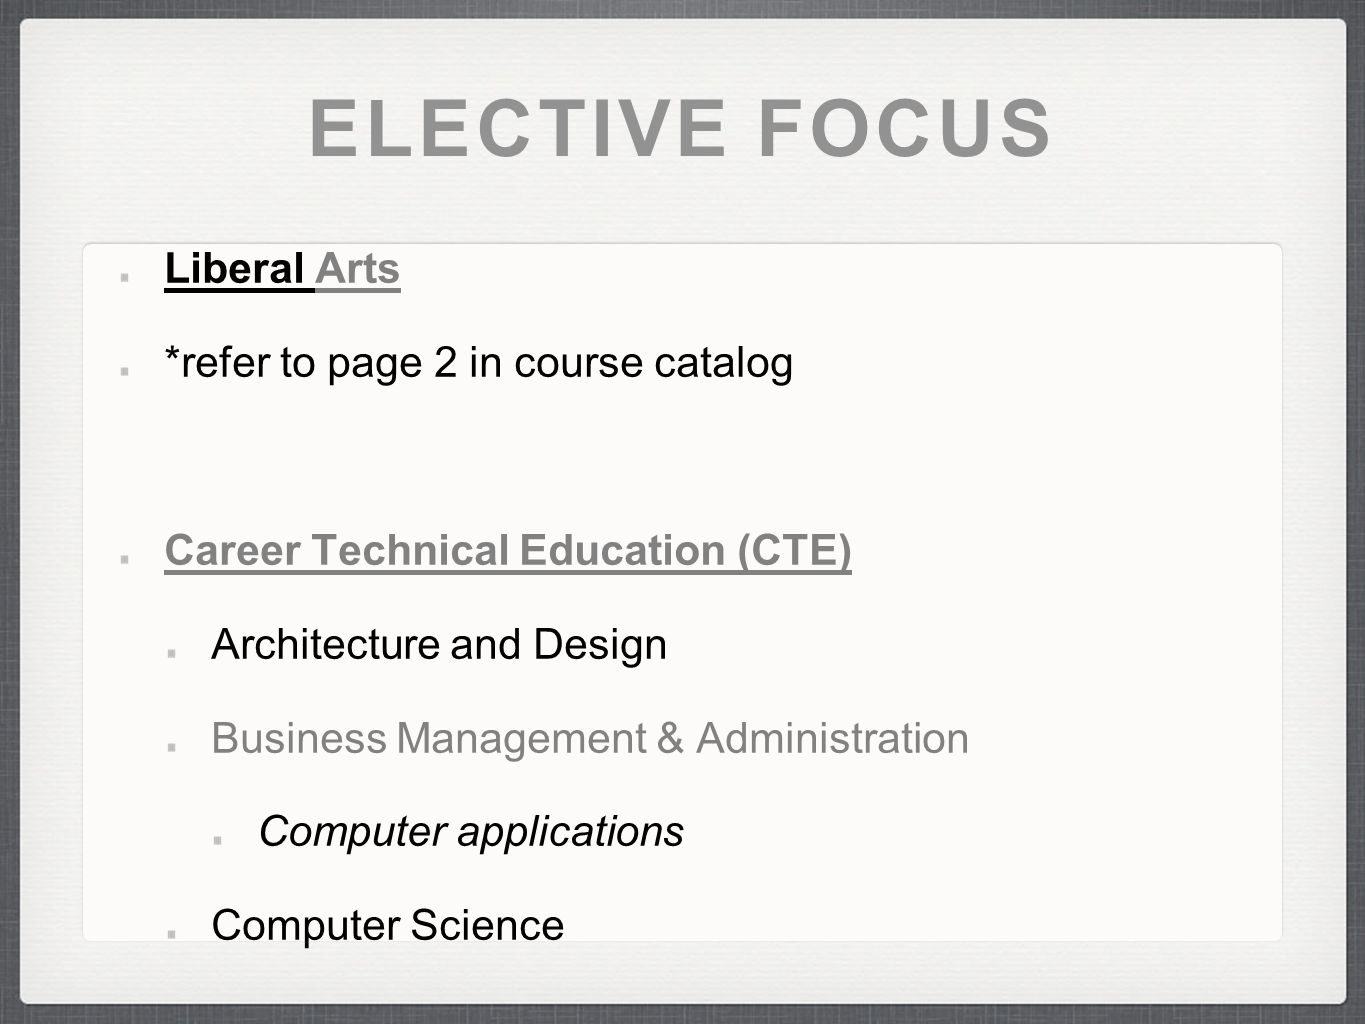 ELECTIVE FOCUS Liberal Arts *refer to page 2 in course catalog Career Technical Education (CTE) Architecture and Design Business Management & Administration Computer applications Computer Science